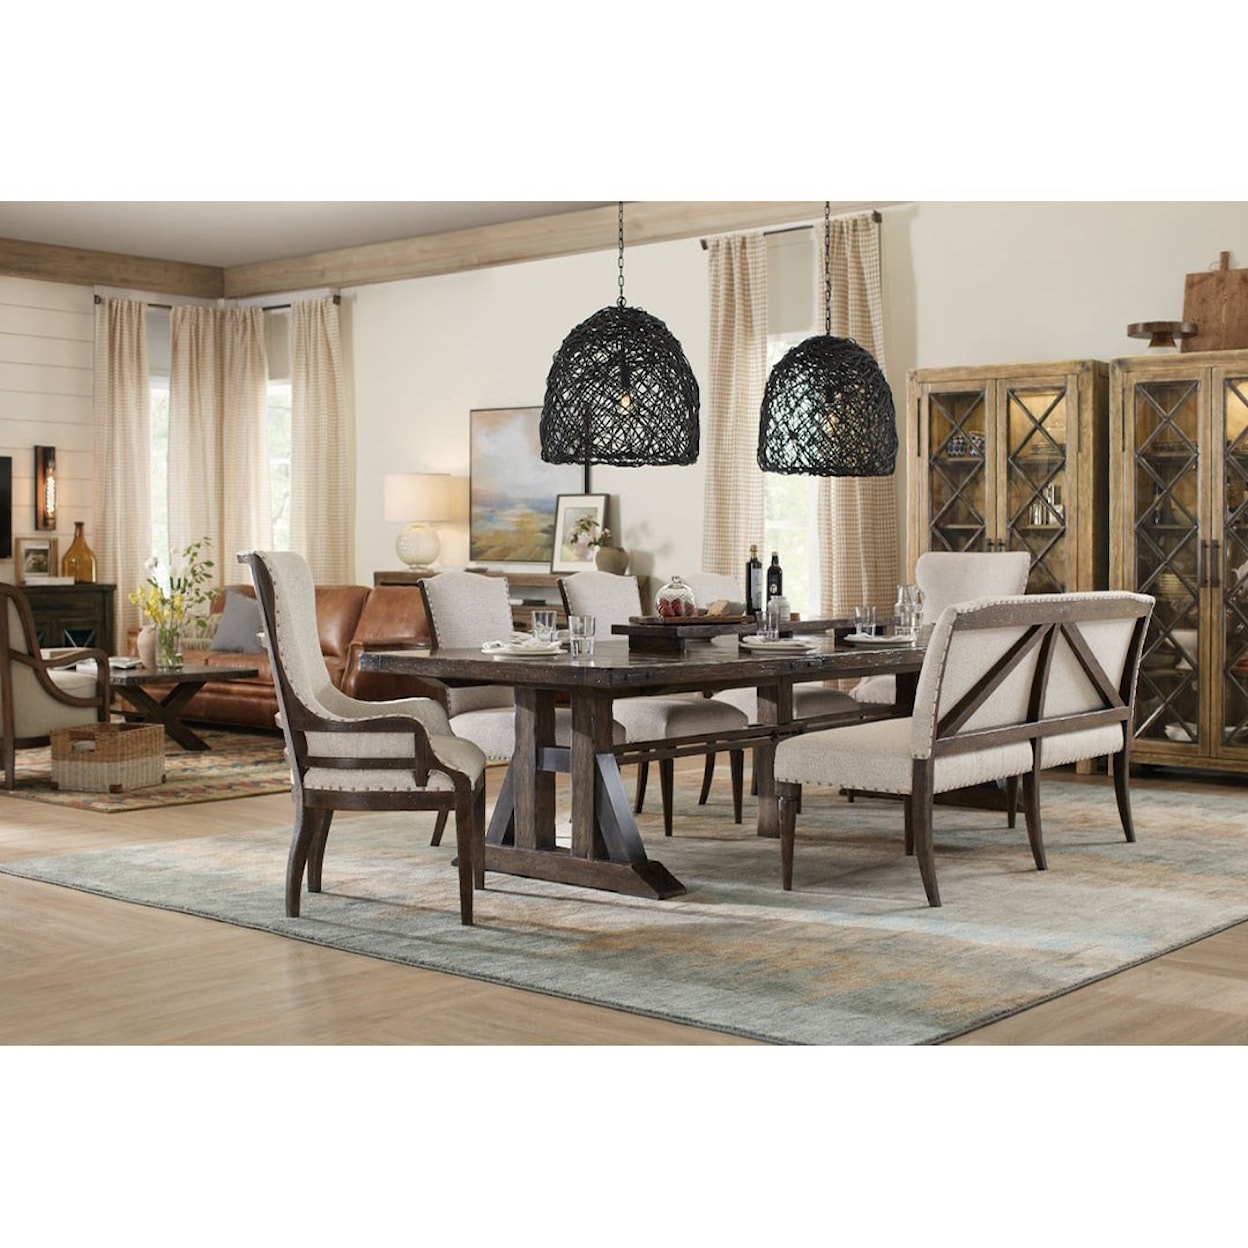 Hooker Furniture American Life - Roslyn County Formal Dining Room Group